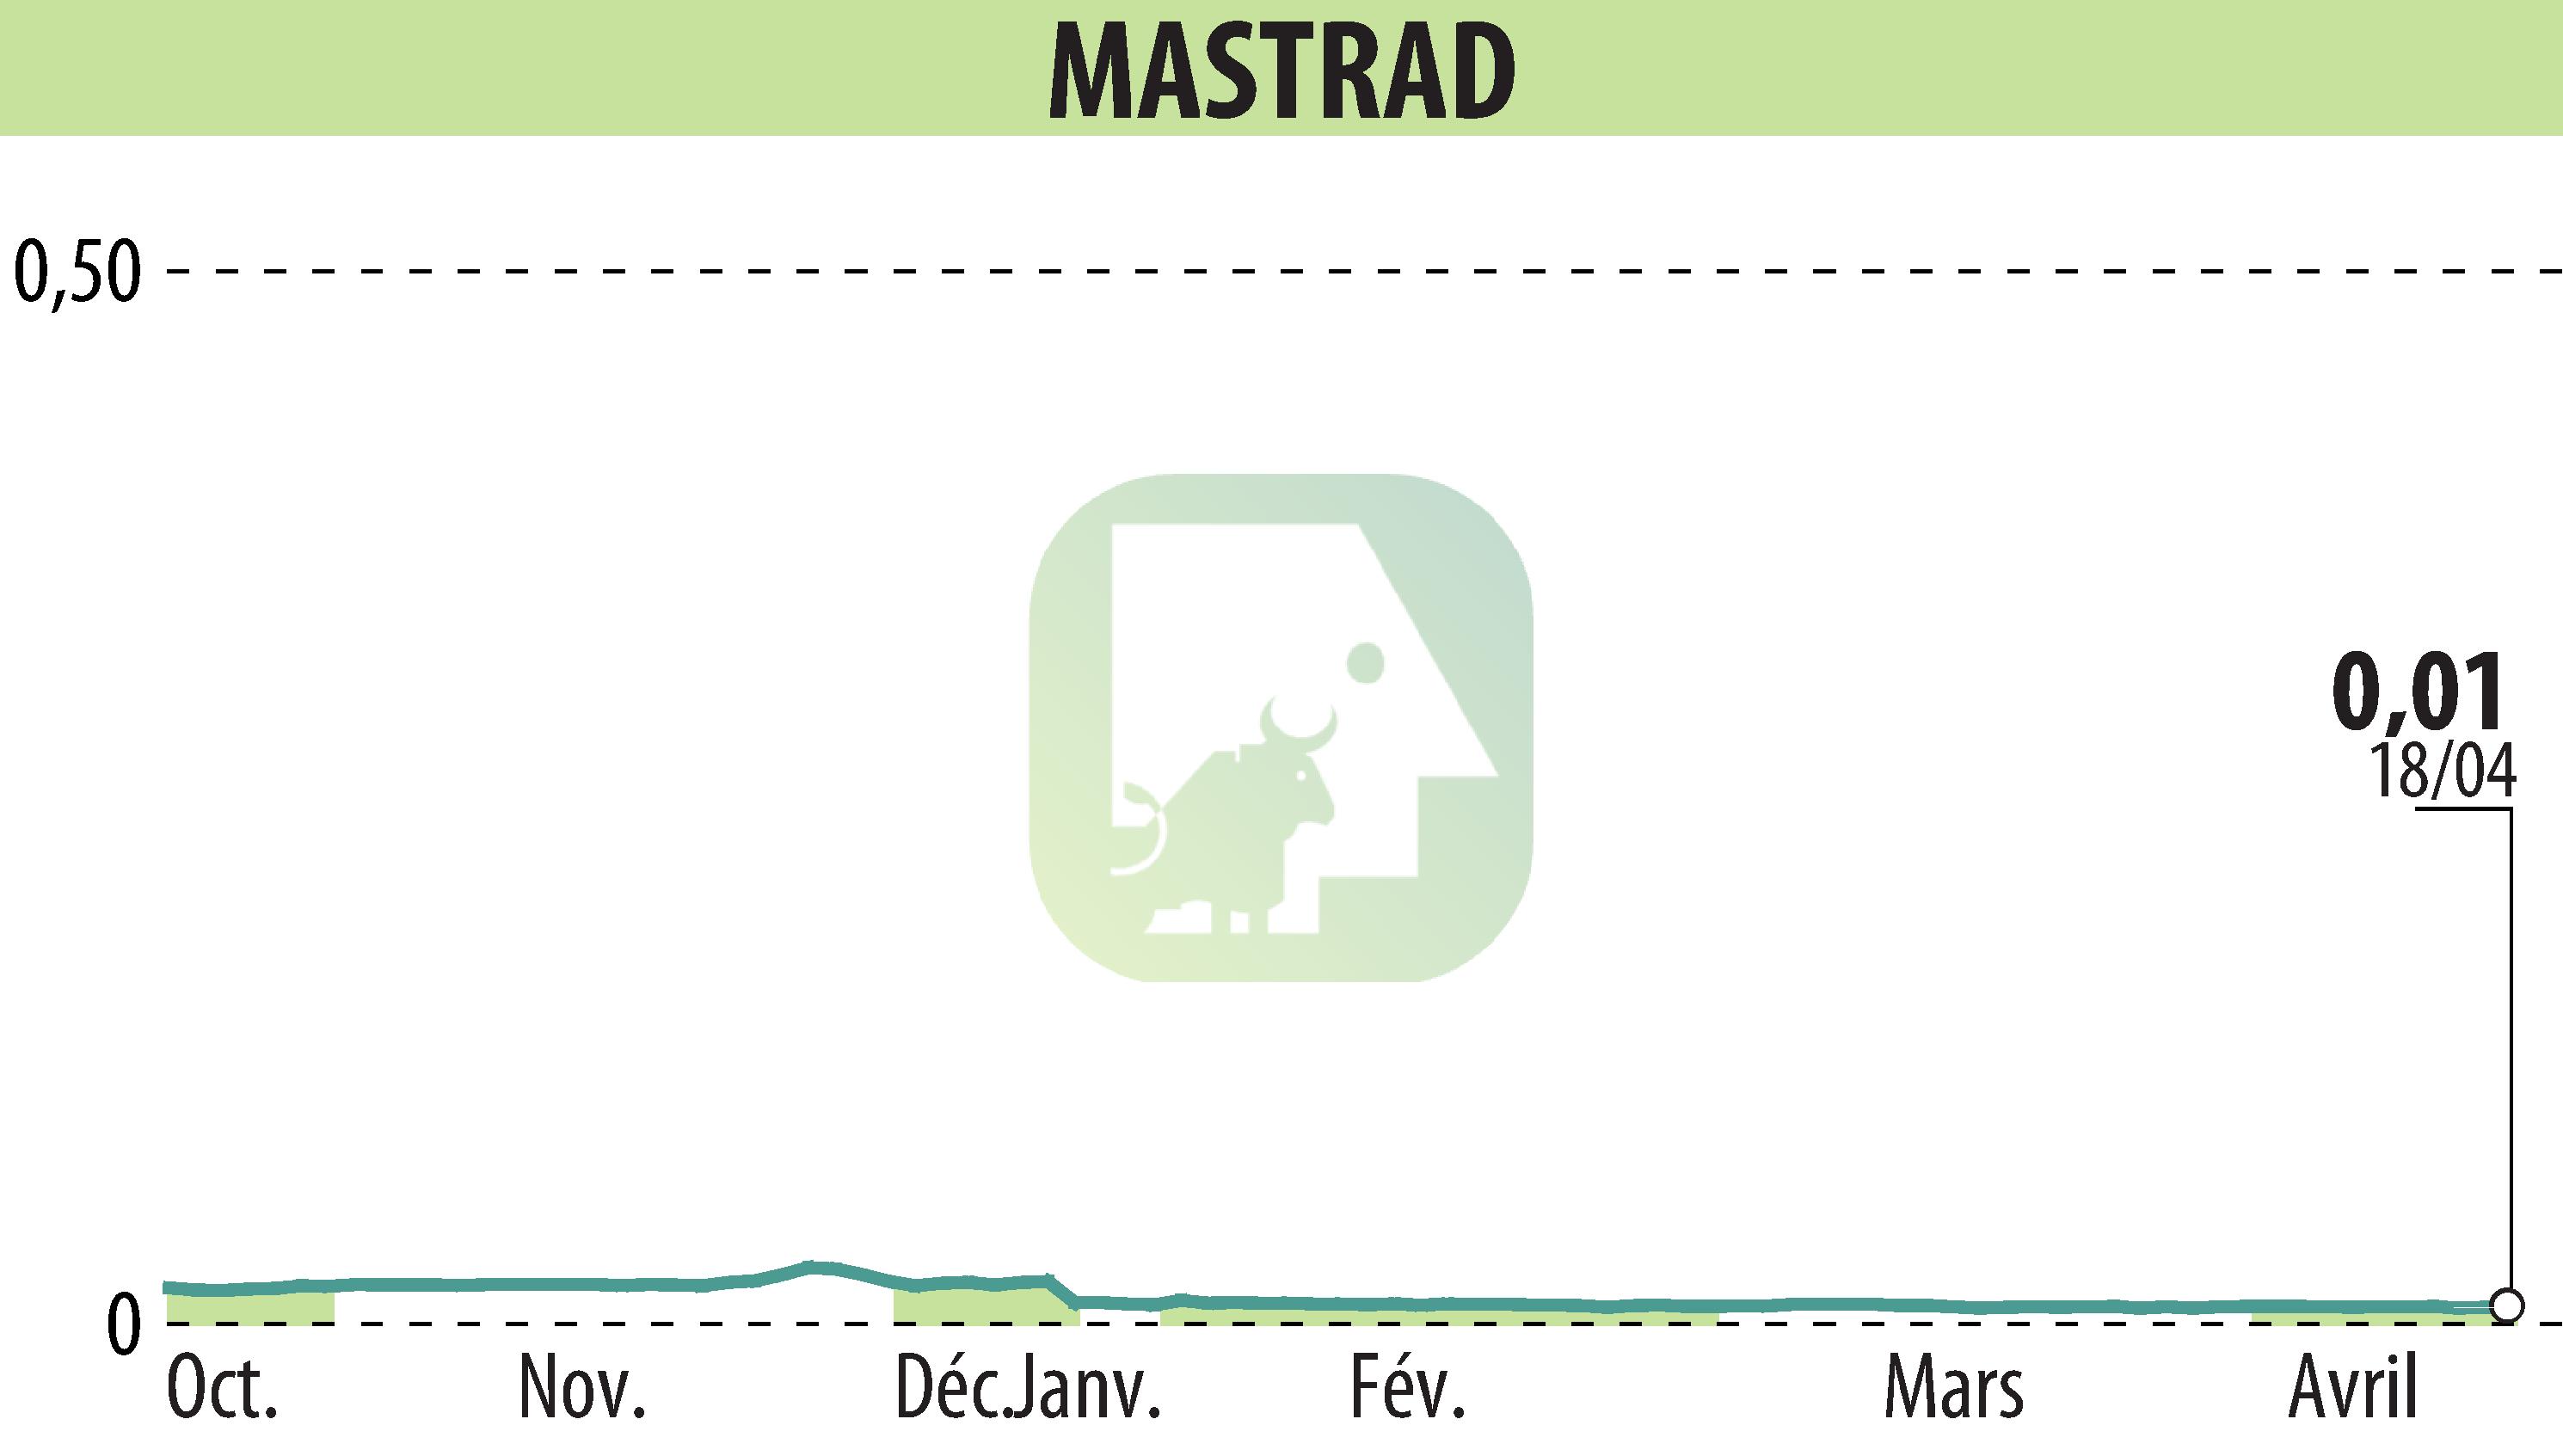 Stock price chart of MASTRAD (EPA:ALMAS) showing fluctuations.